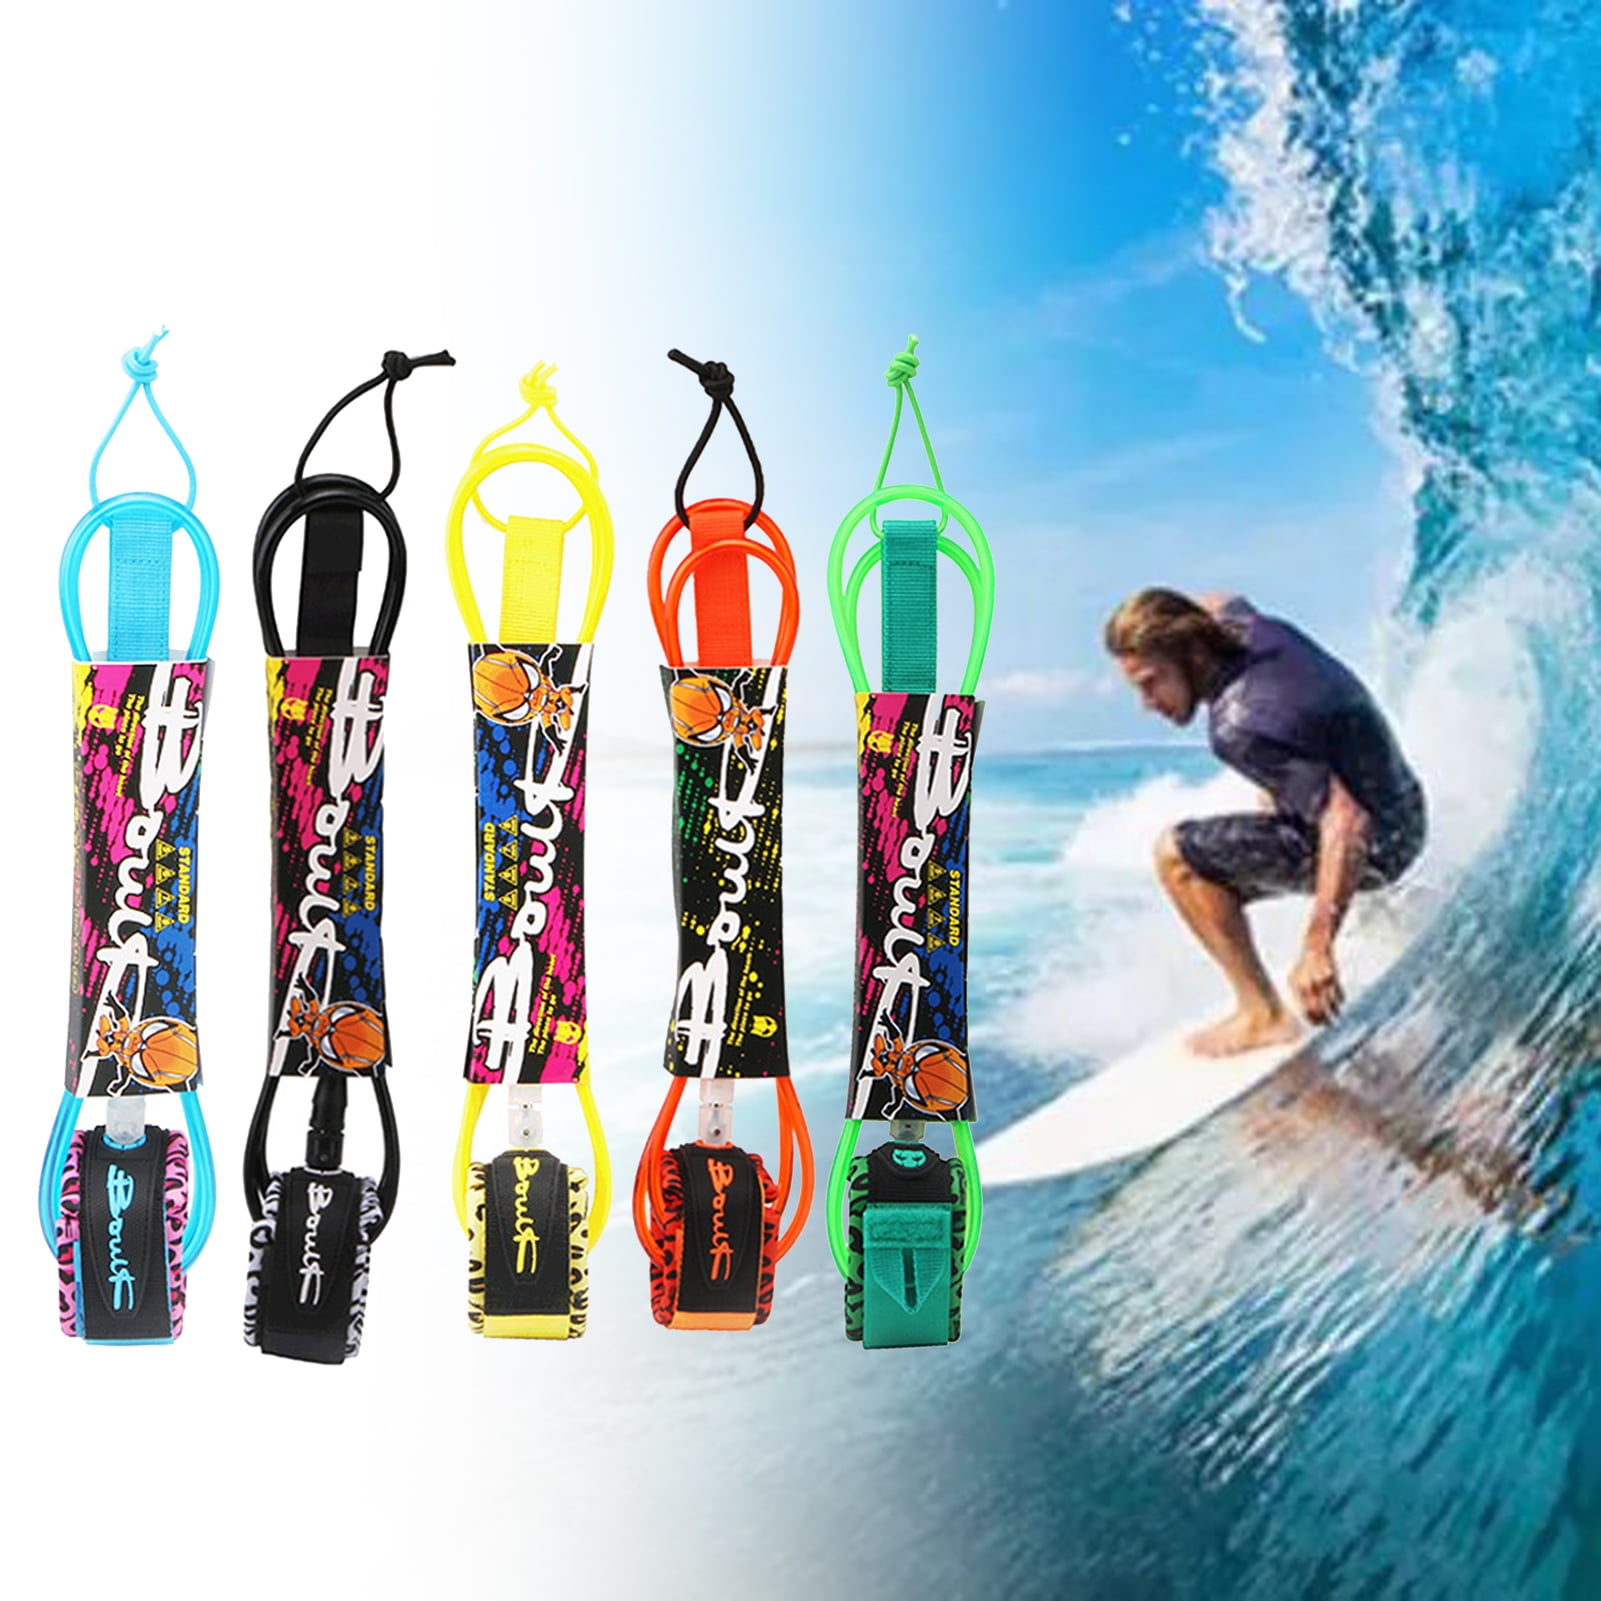 11ft Ankle Leash Surfing Coiled Stand UP Paddle Board Black TPU Foot Leg Rope Surfboard Raft Traction Rope